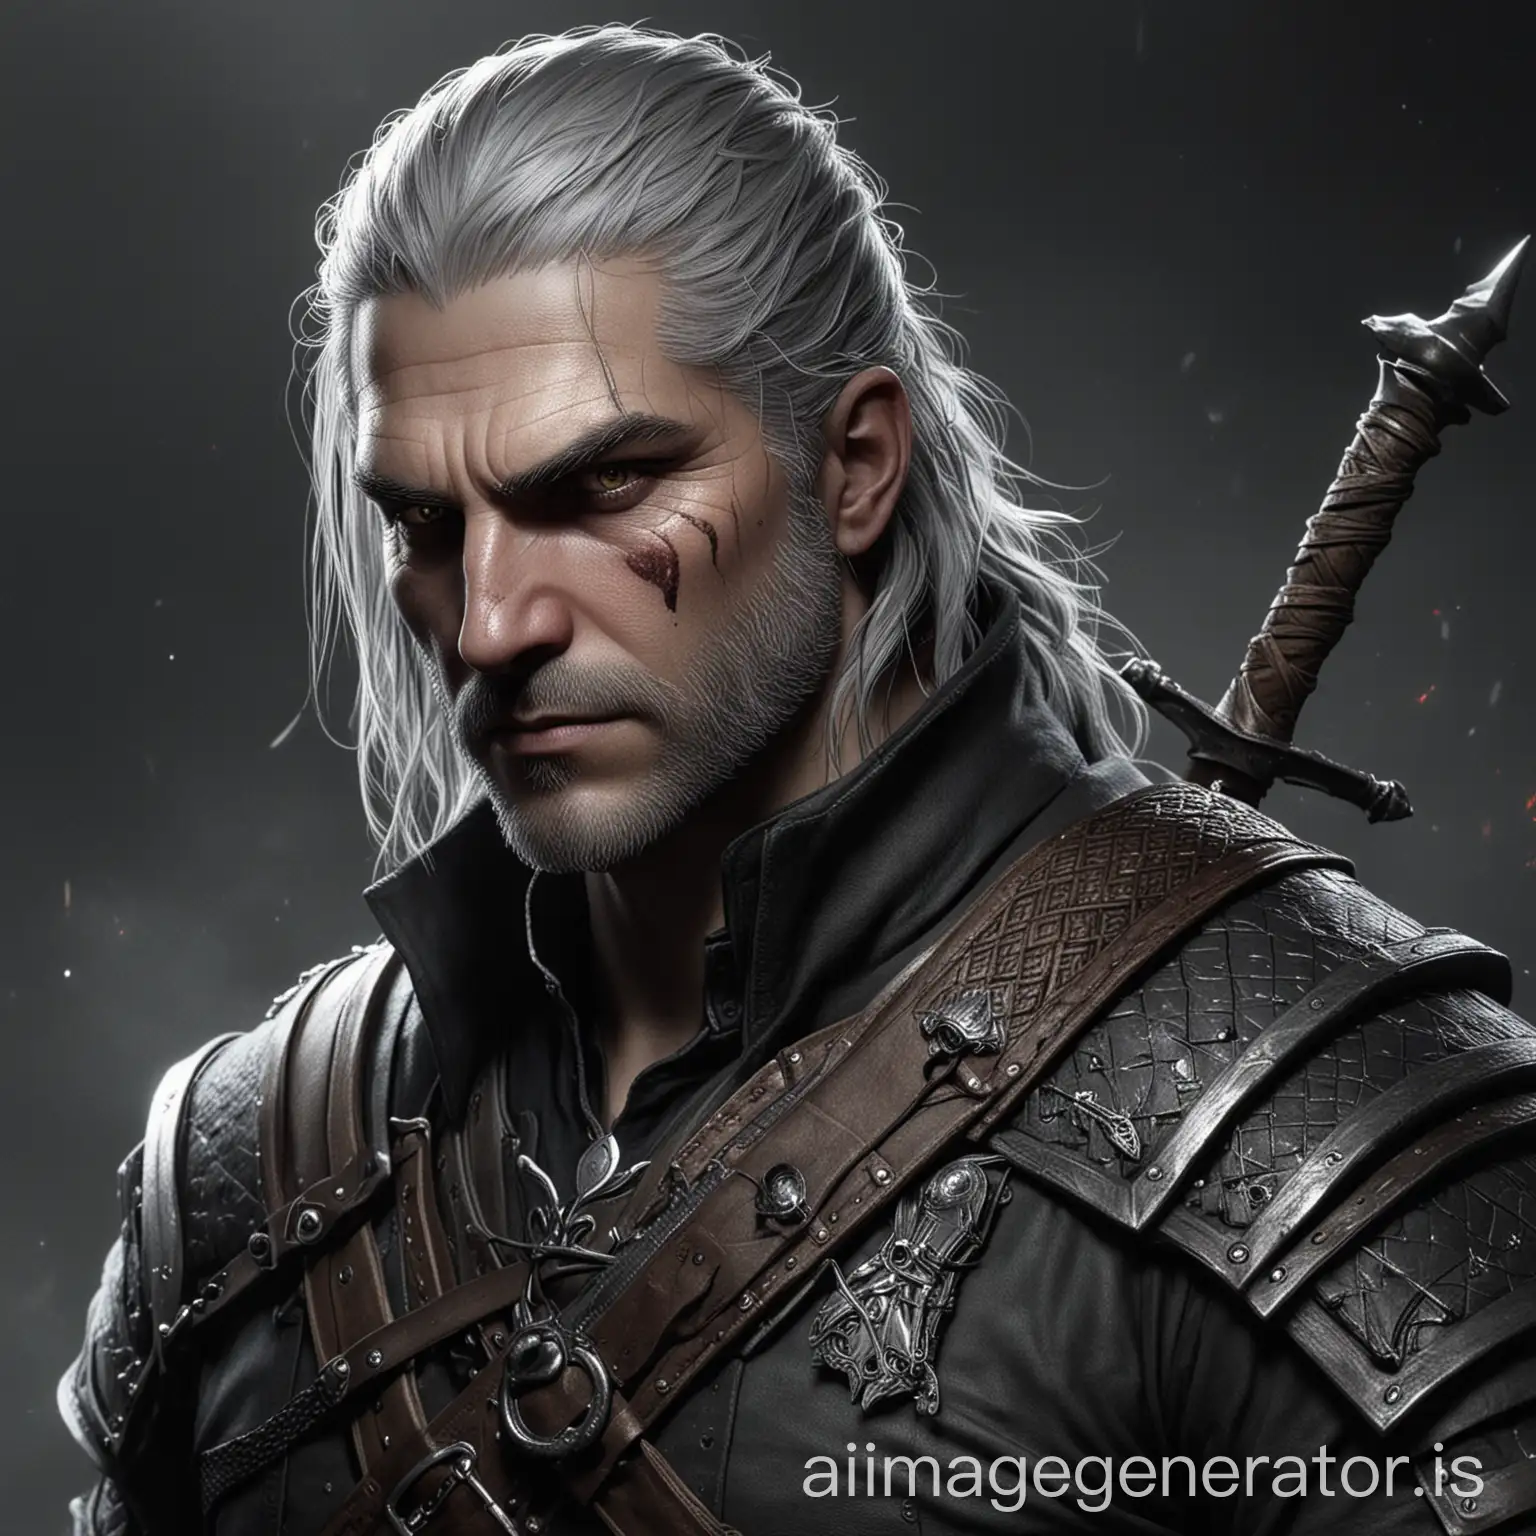 Mysterious-Fusion-of-Geralt-of-Rivia-and-The-Hunter-from-Bloodborne